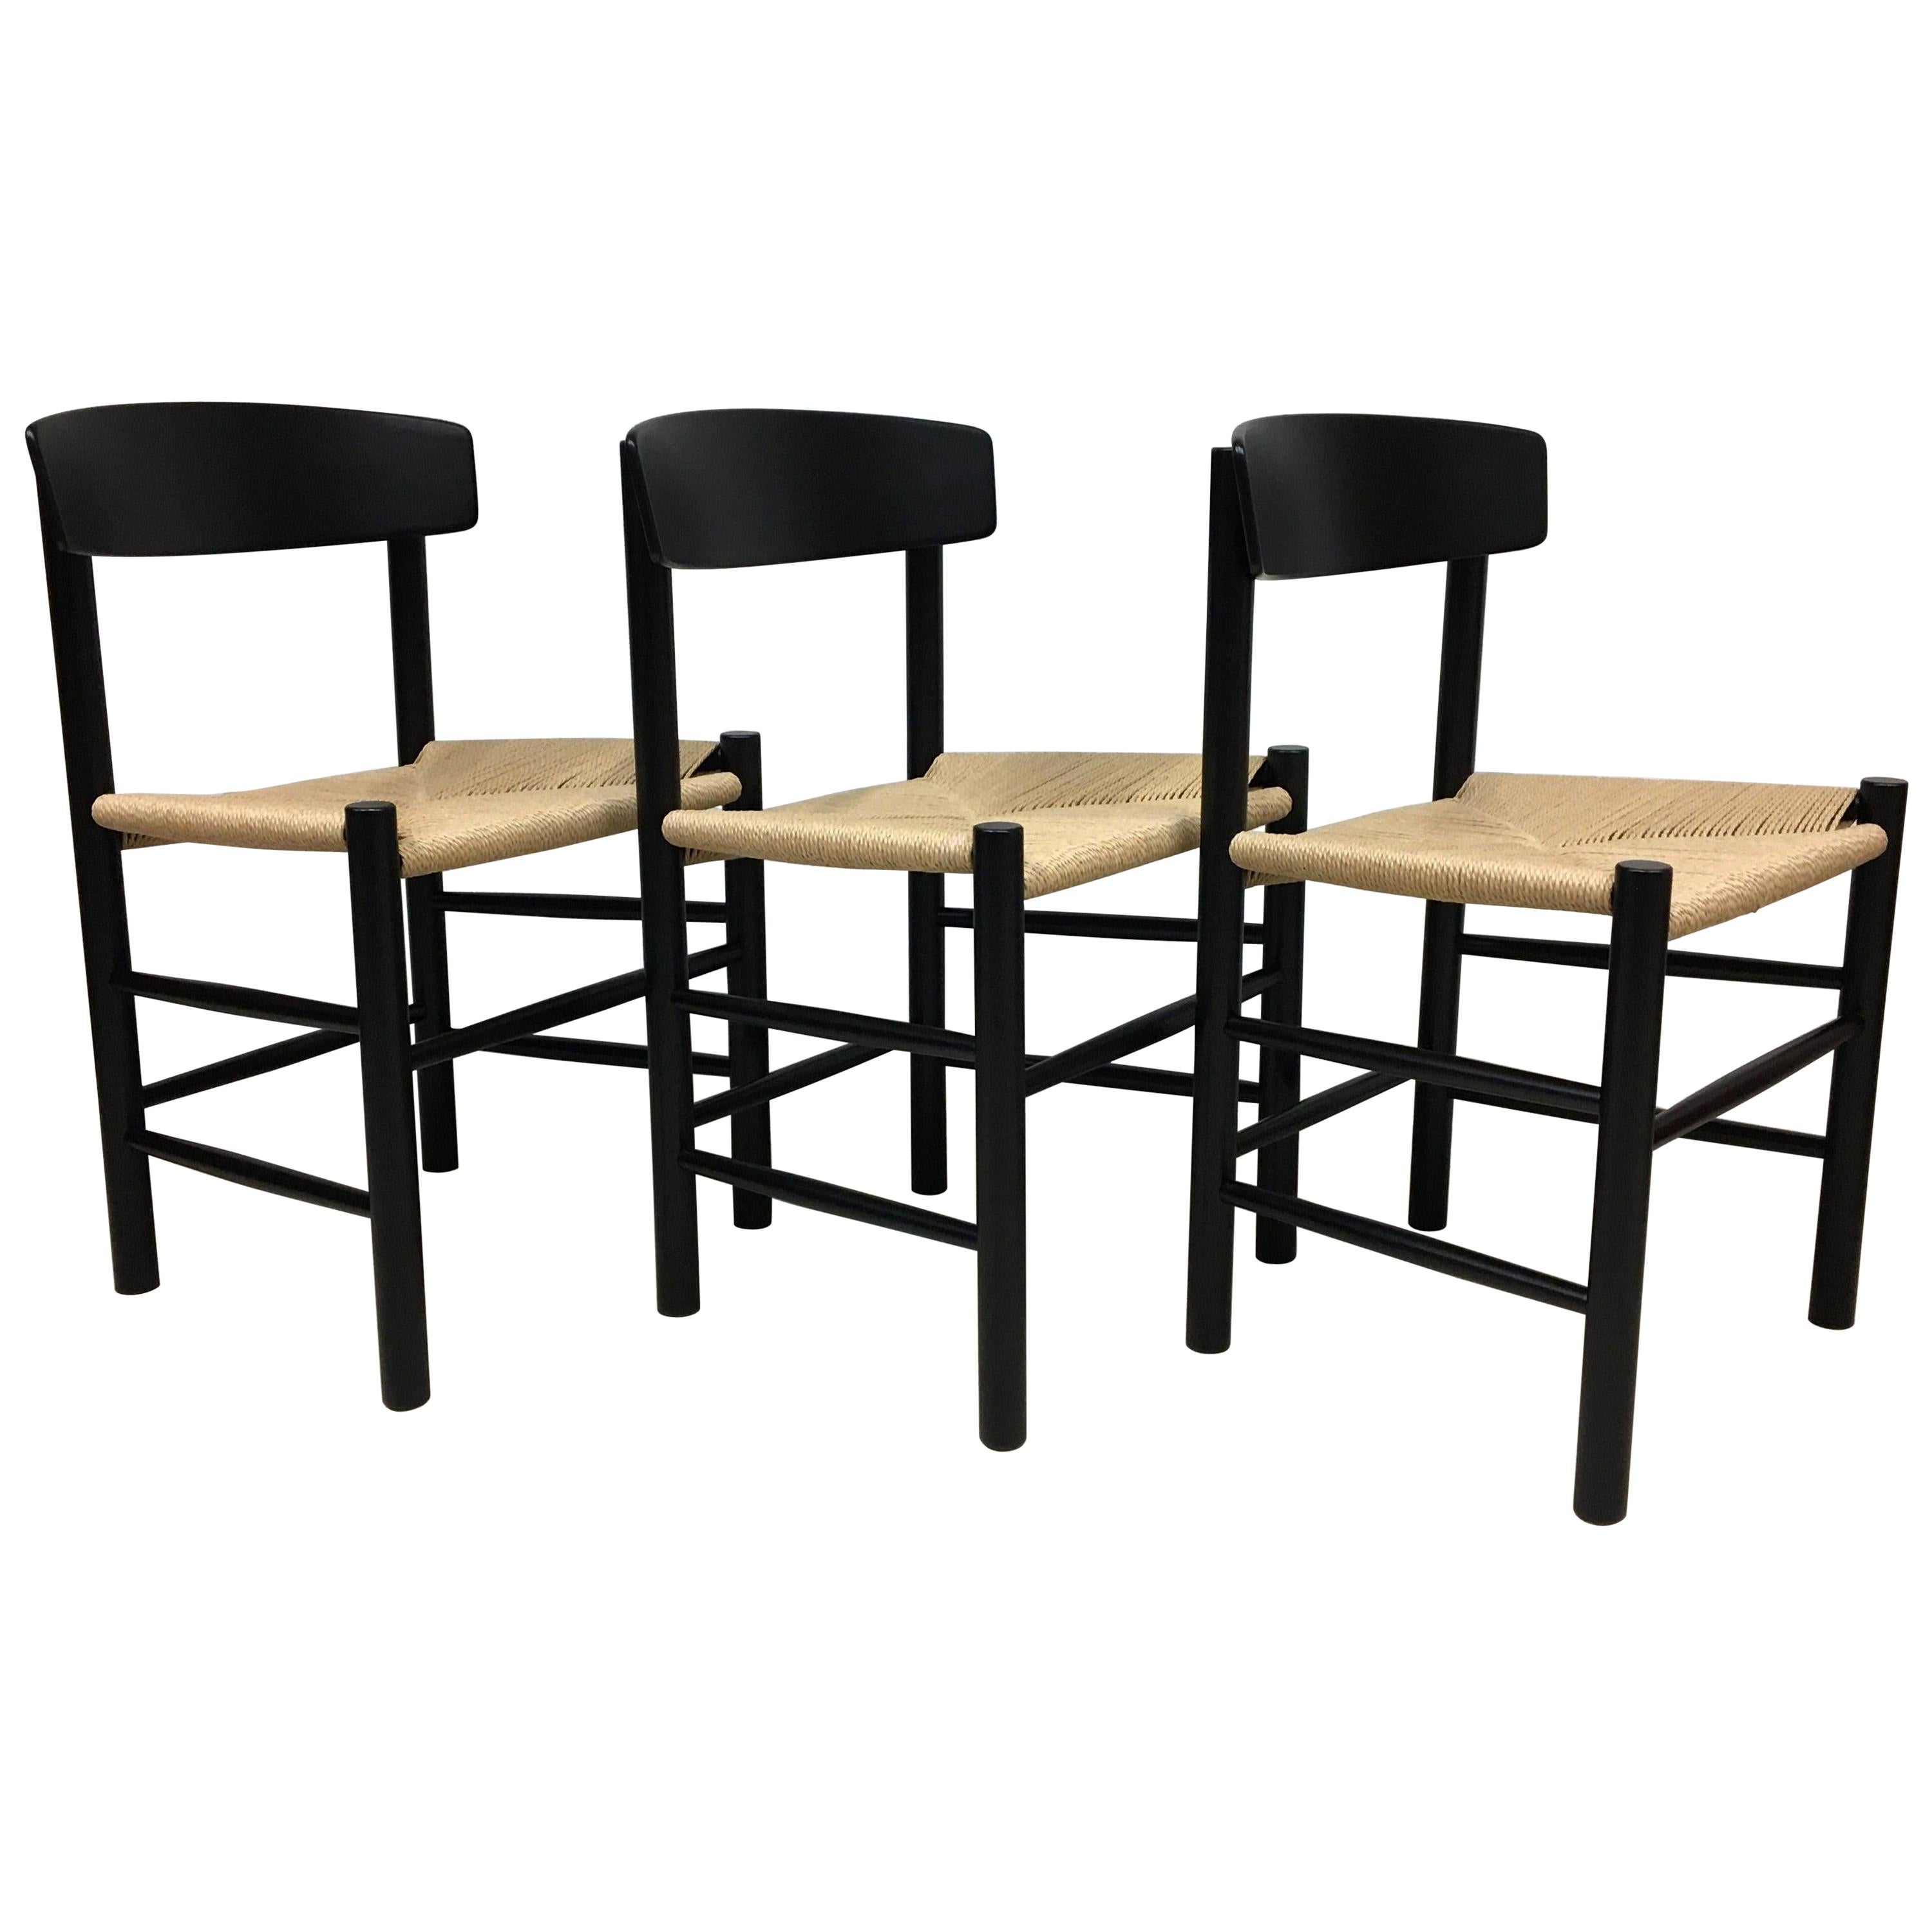 3Børge Mogensen 'Folkestole' Dining Chairs J39 Black Lacquer with New Paper Cord